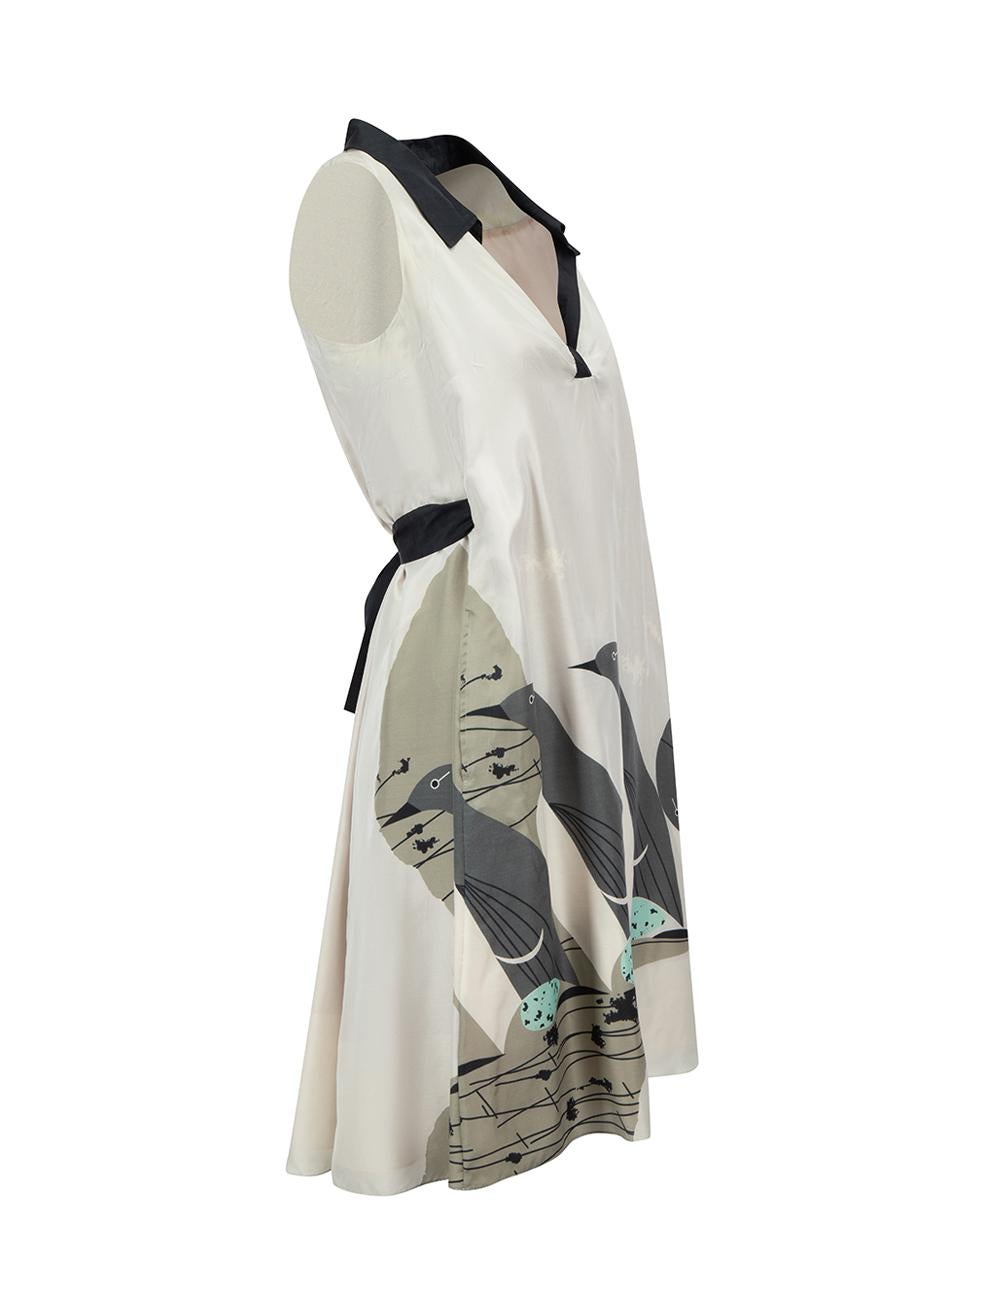 CONDITION is Very good. Minimal wear to dress is evident. Minimal wear to both underarms and the front with discoloured marks on this used Céline designer resale item.



Details


Multicolour

Silk

Dress

Bird graphic